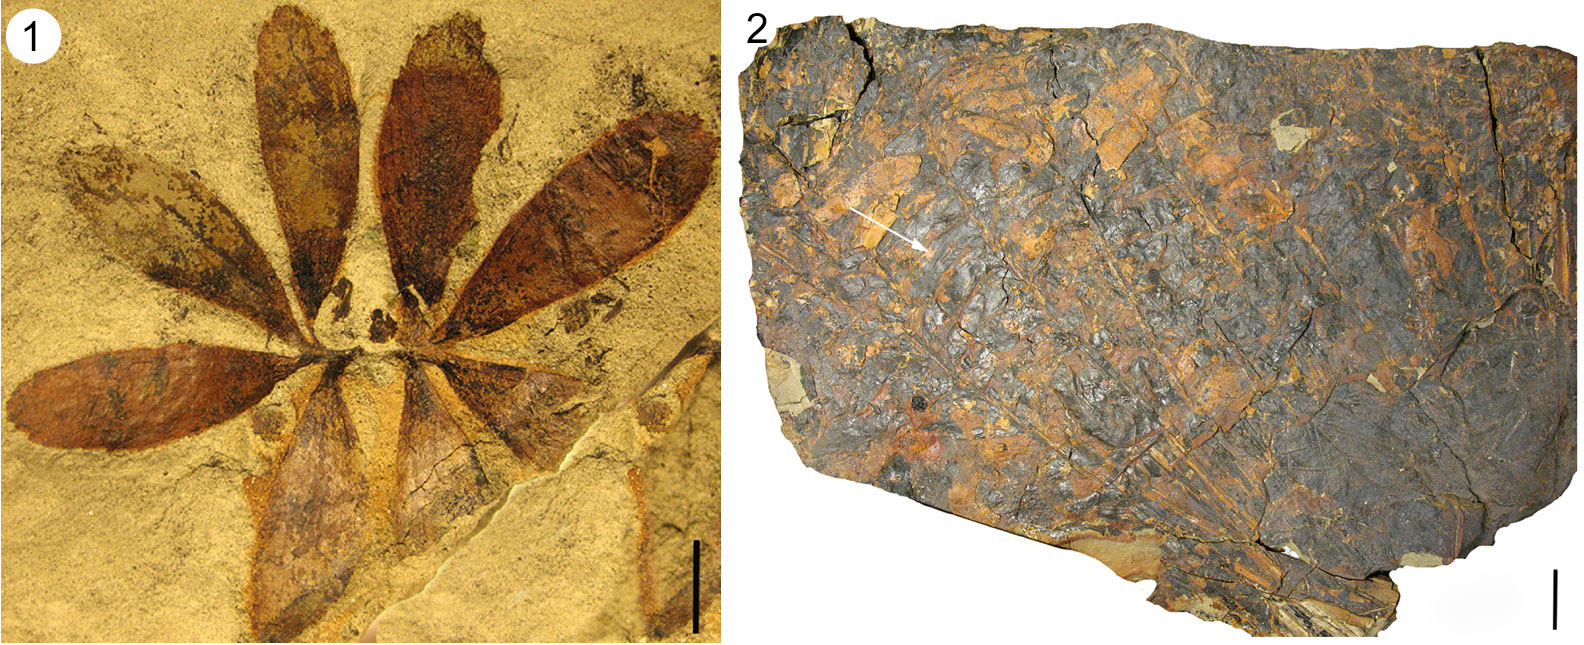 2-Panel image showing fossil cycads from the Paleocene Castle Rock flora of Colorado. Panel 1: Leaves of a seedling. The leaves appear to be in an opposite pair. Each is pinnately compound with four leaflets. Panel 2: Large rock slab preserving a flush of mature cycad leaves. Unfortunately, the pinnately compound leaves do not stand out against the background, so the rock appears mostly a mixture of orange and gray regions.